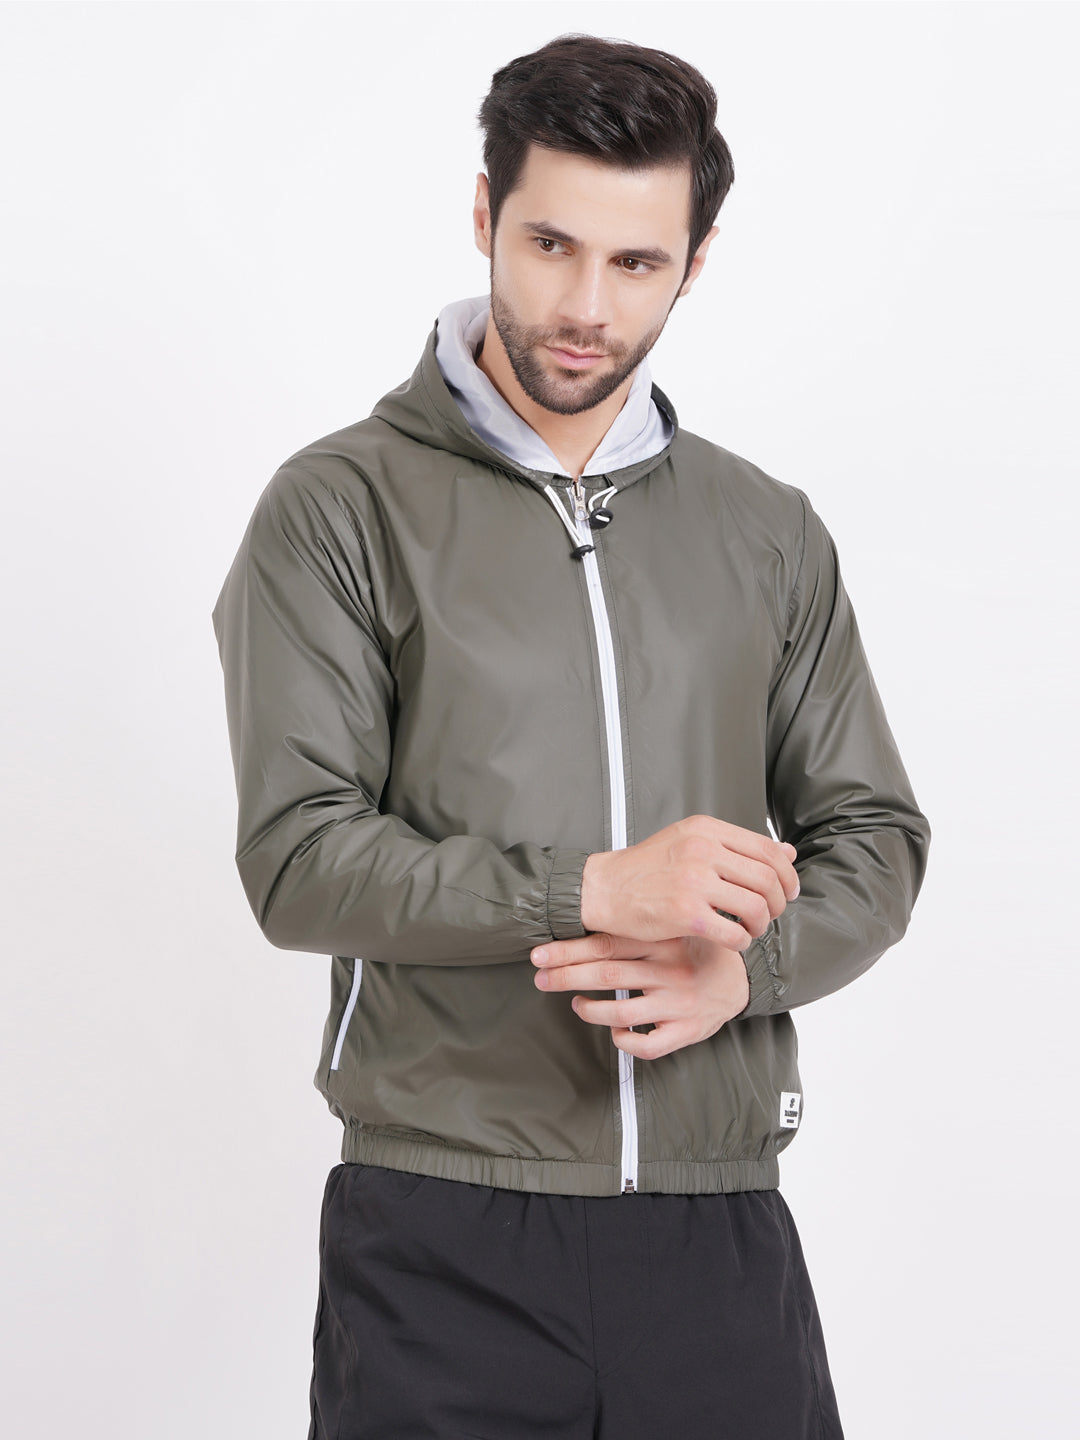 Lightweight Jacket for Men and Women - Unisex Jacket with Pouch Pocket